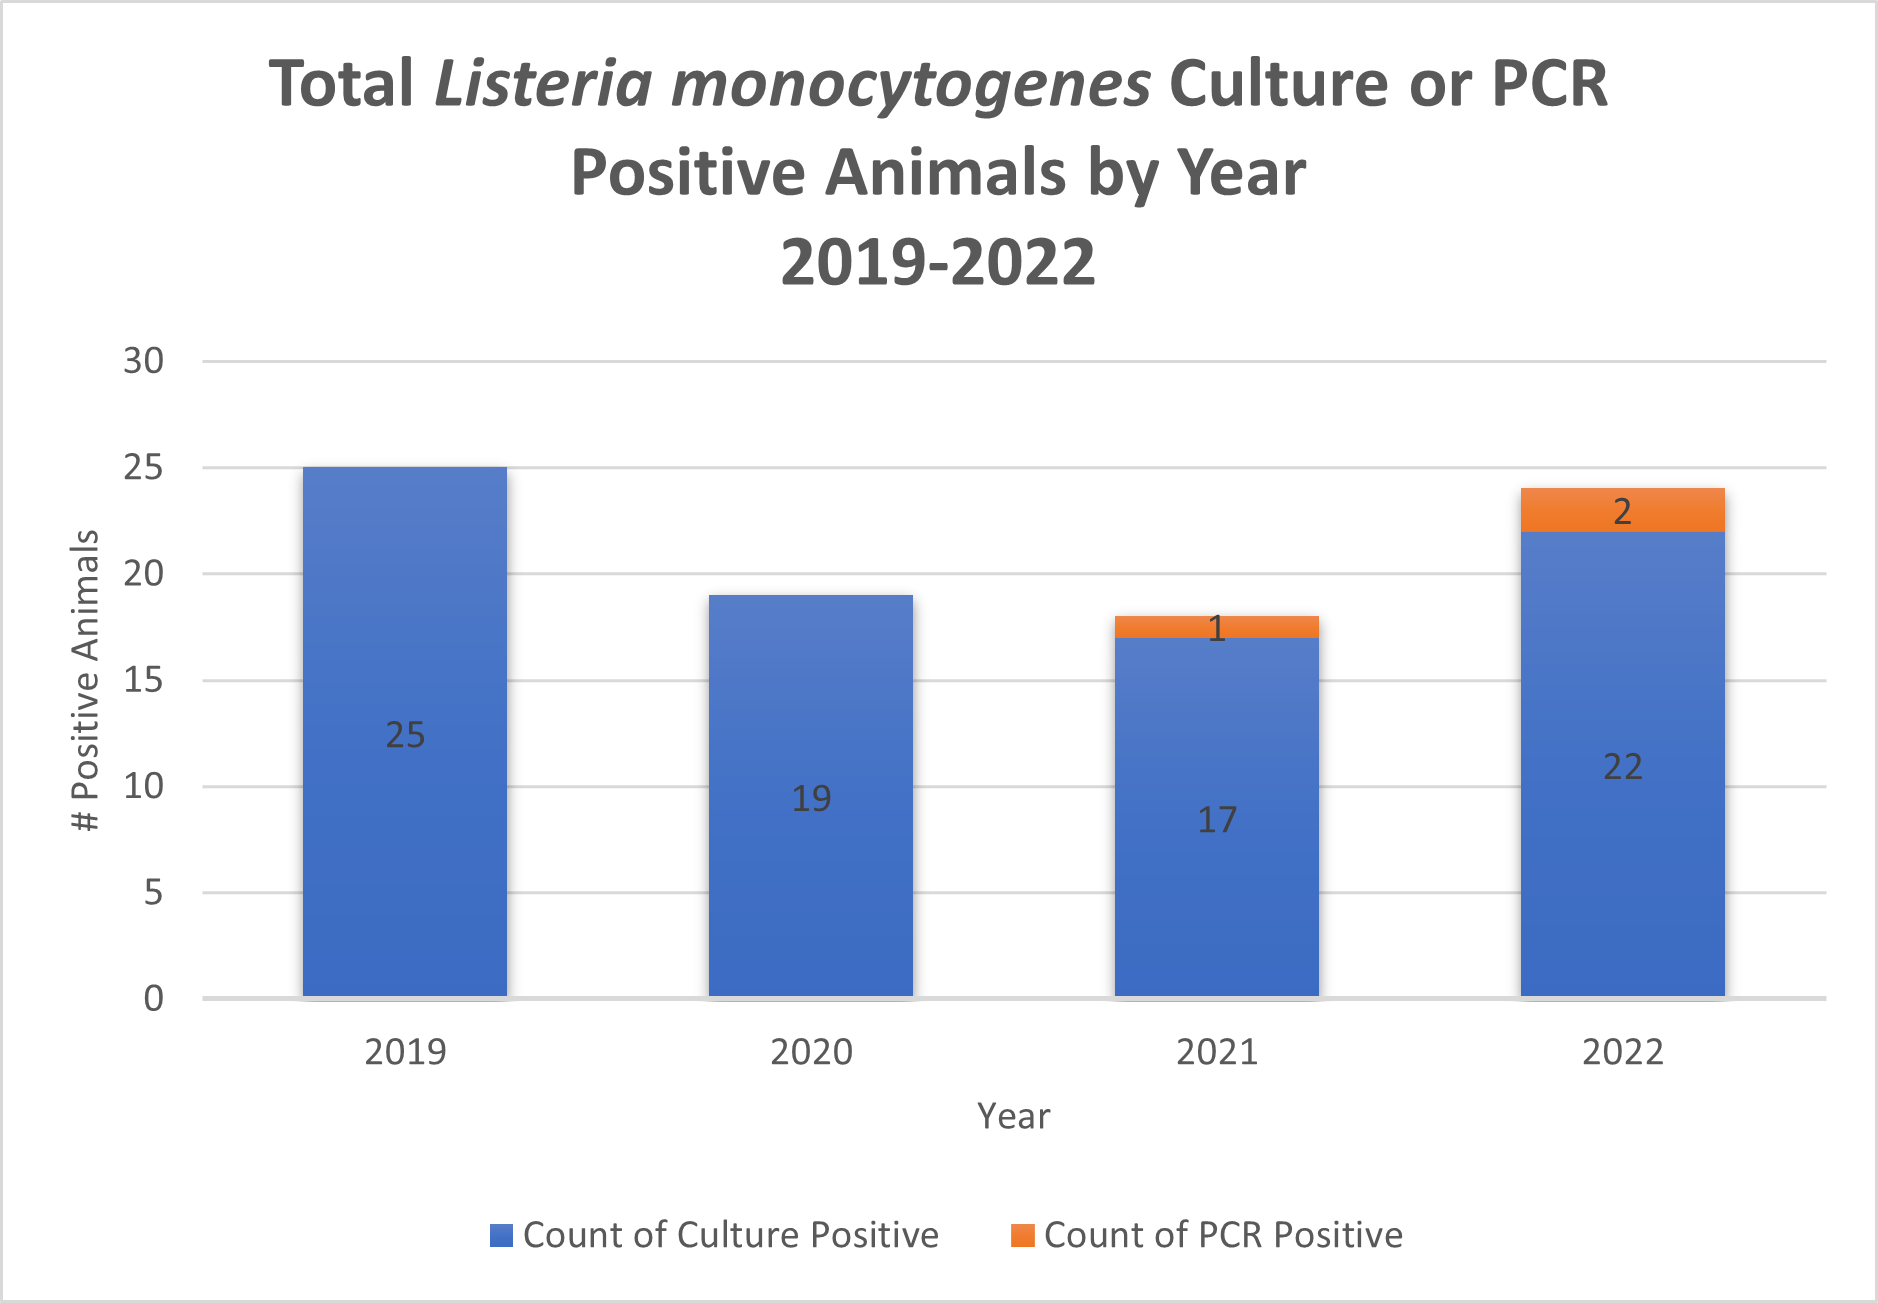 Number of animals that tested positive for Listeria monocytogenes via culture or PCR received by the Cornell Animal Health Diagnostic Center from 2019-2022. 